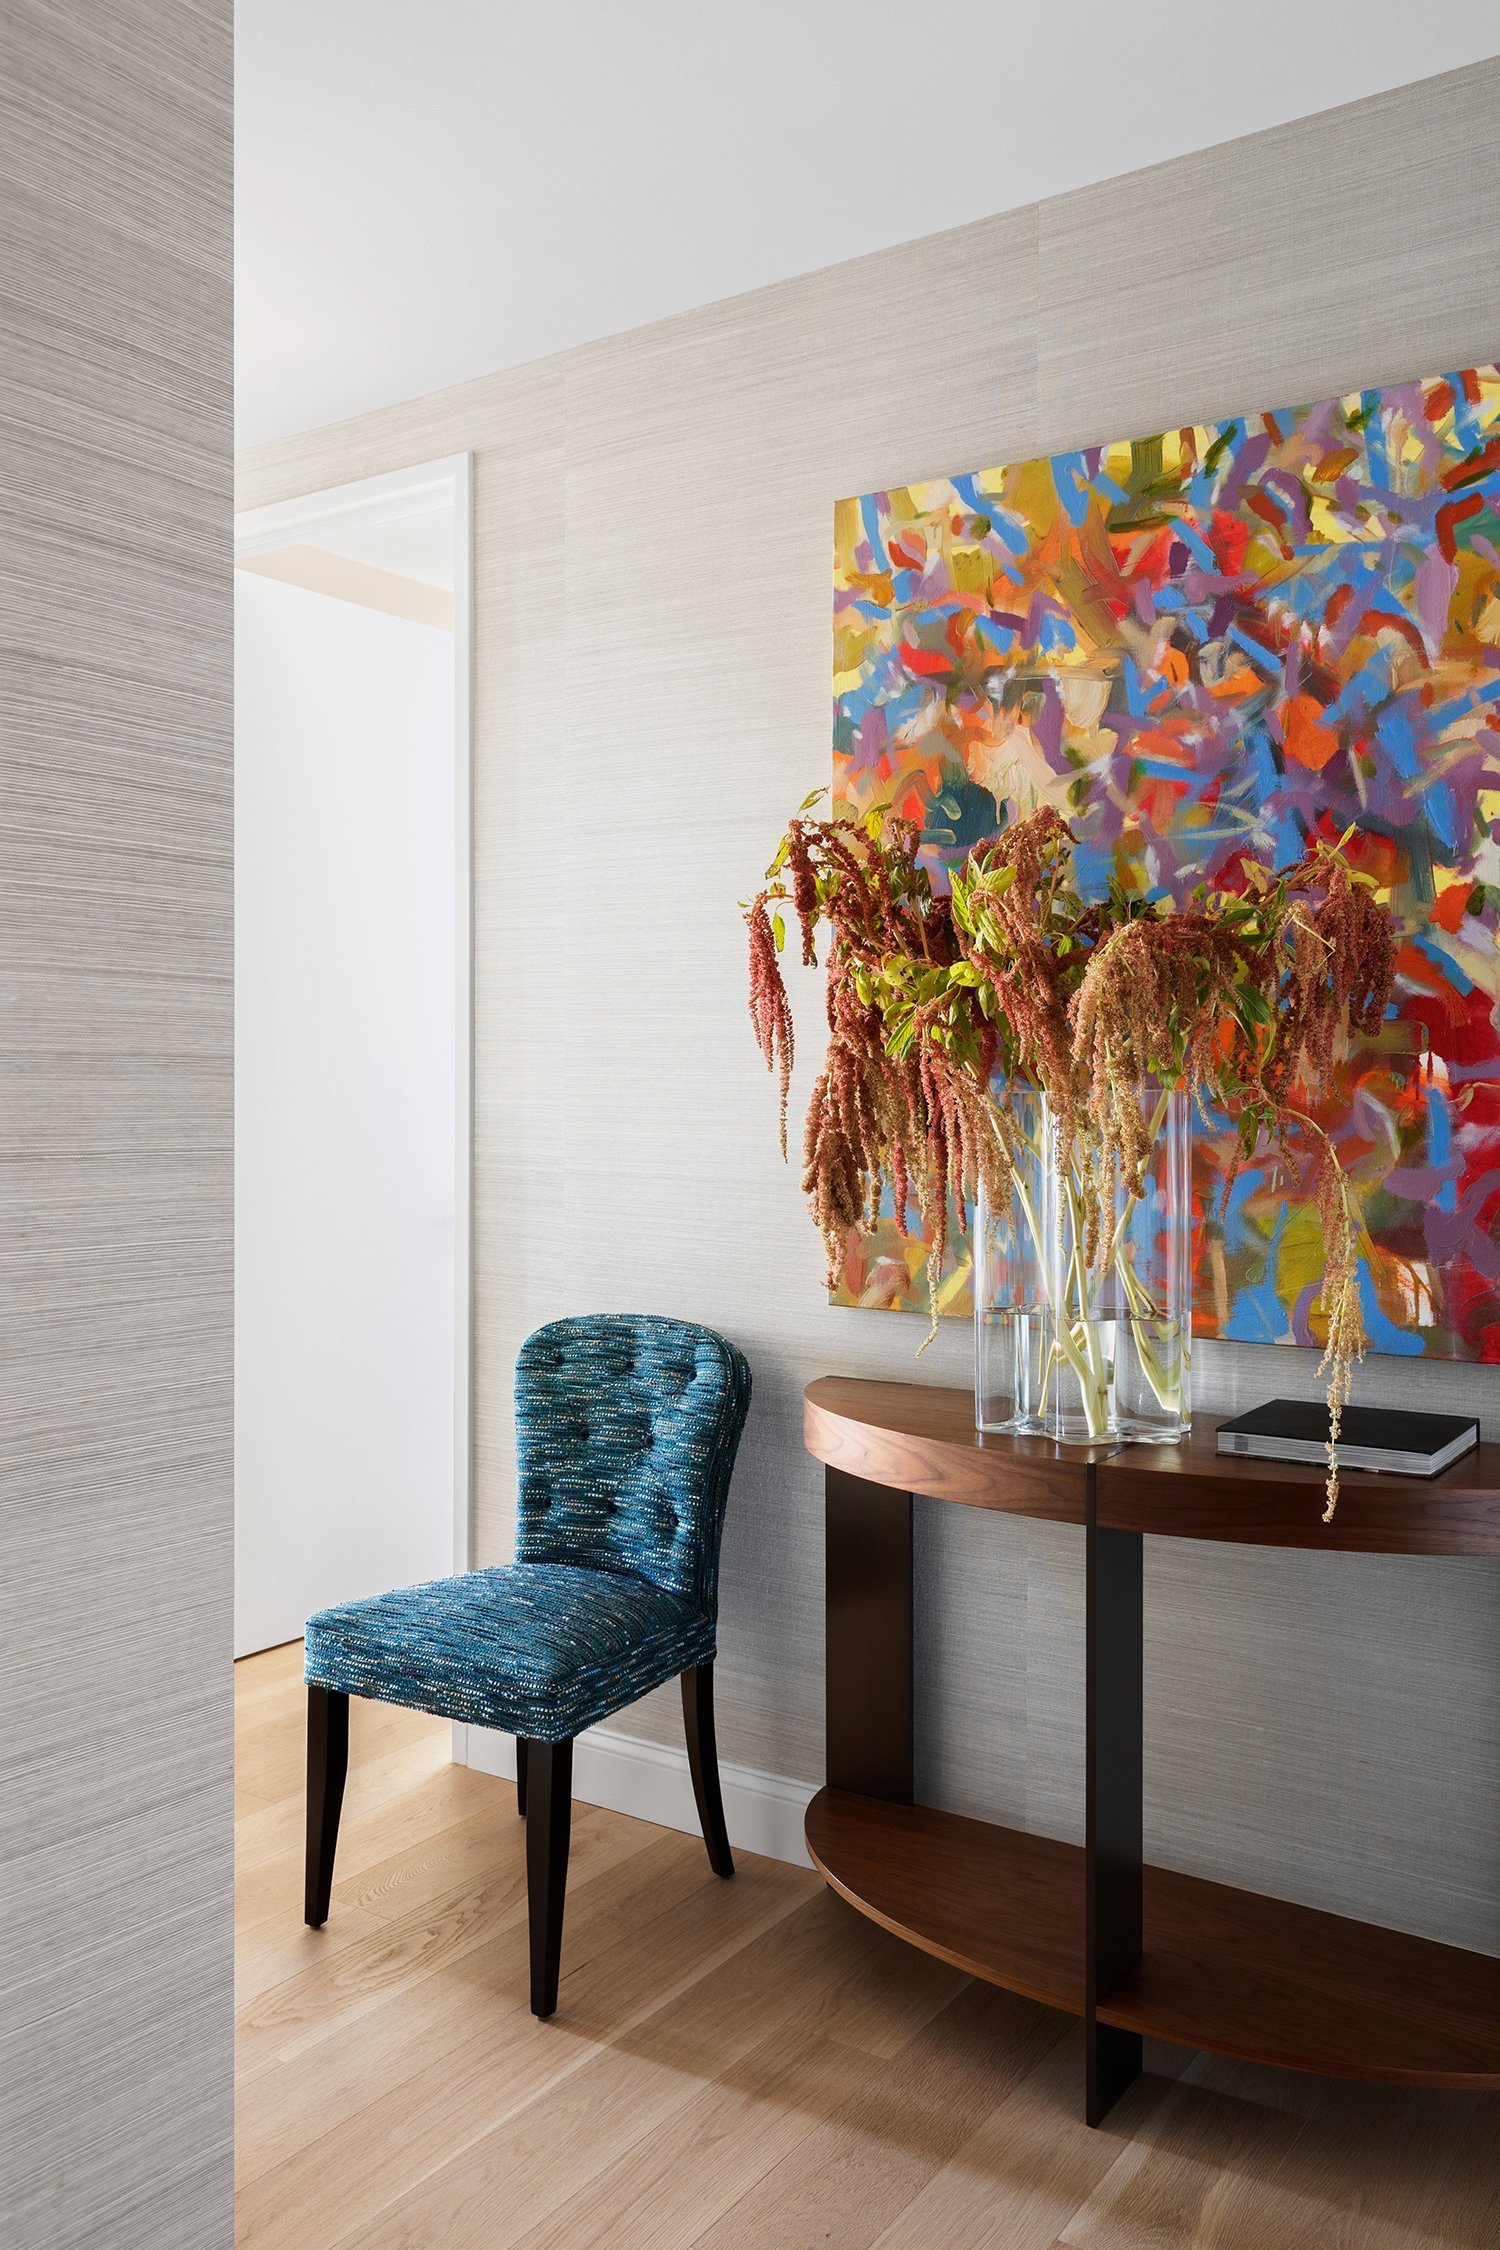  The foyer reflects the owner’s love of color and gives you a glimpse of what’s to come. 